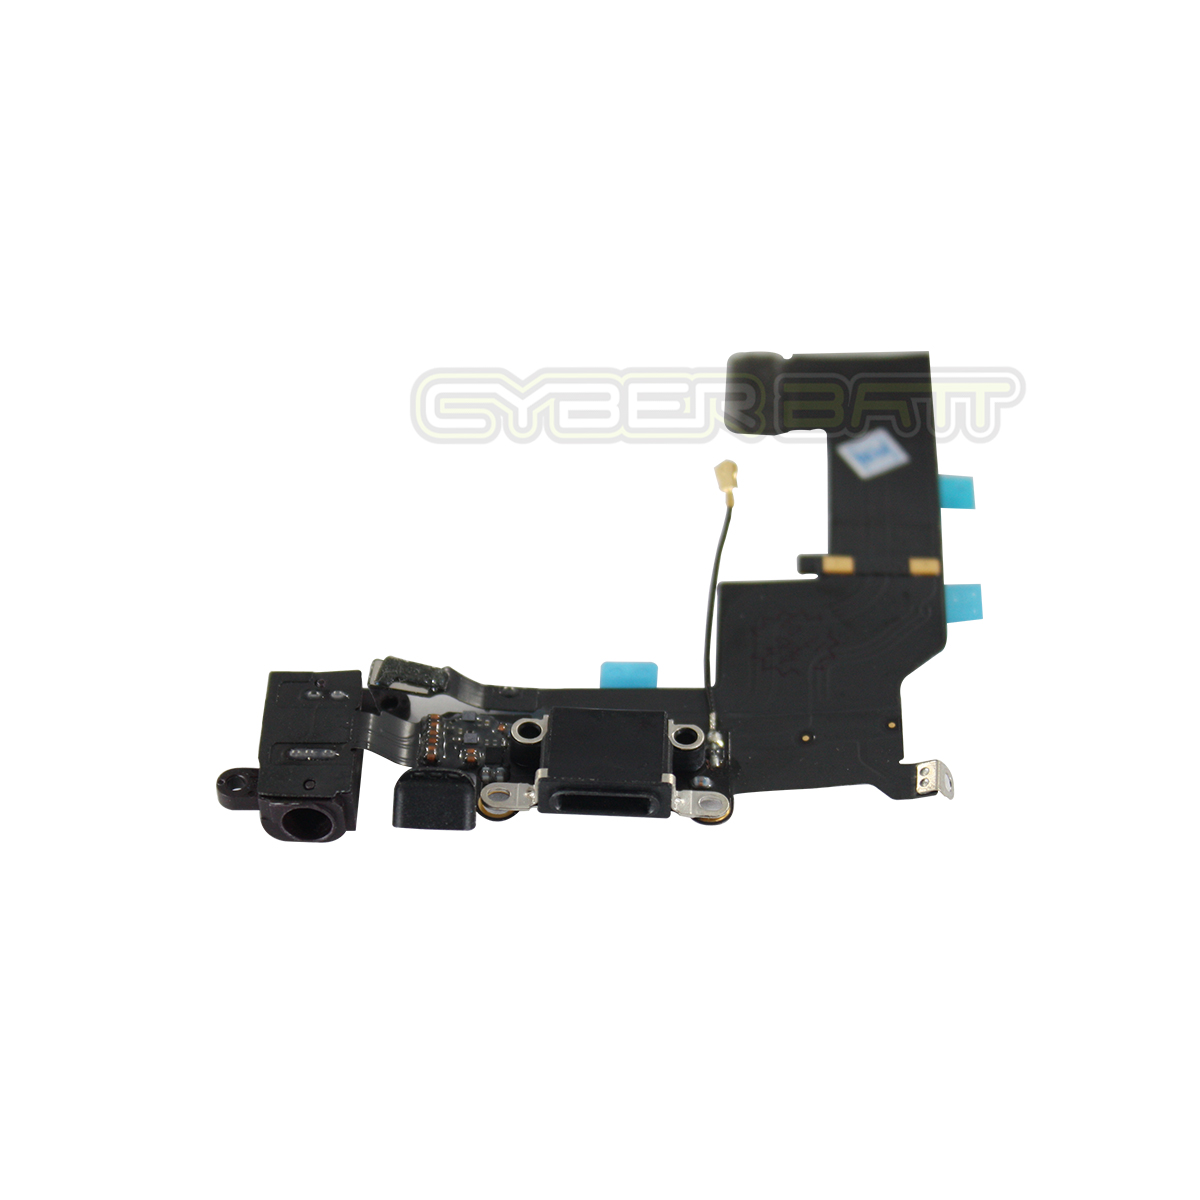 iphone 5s lightning connector